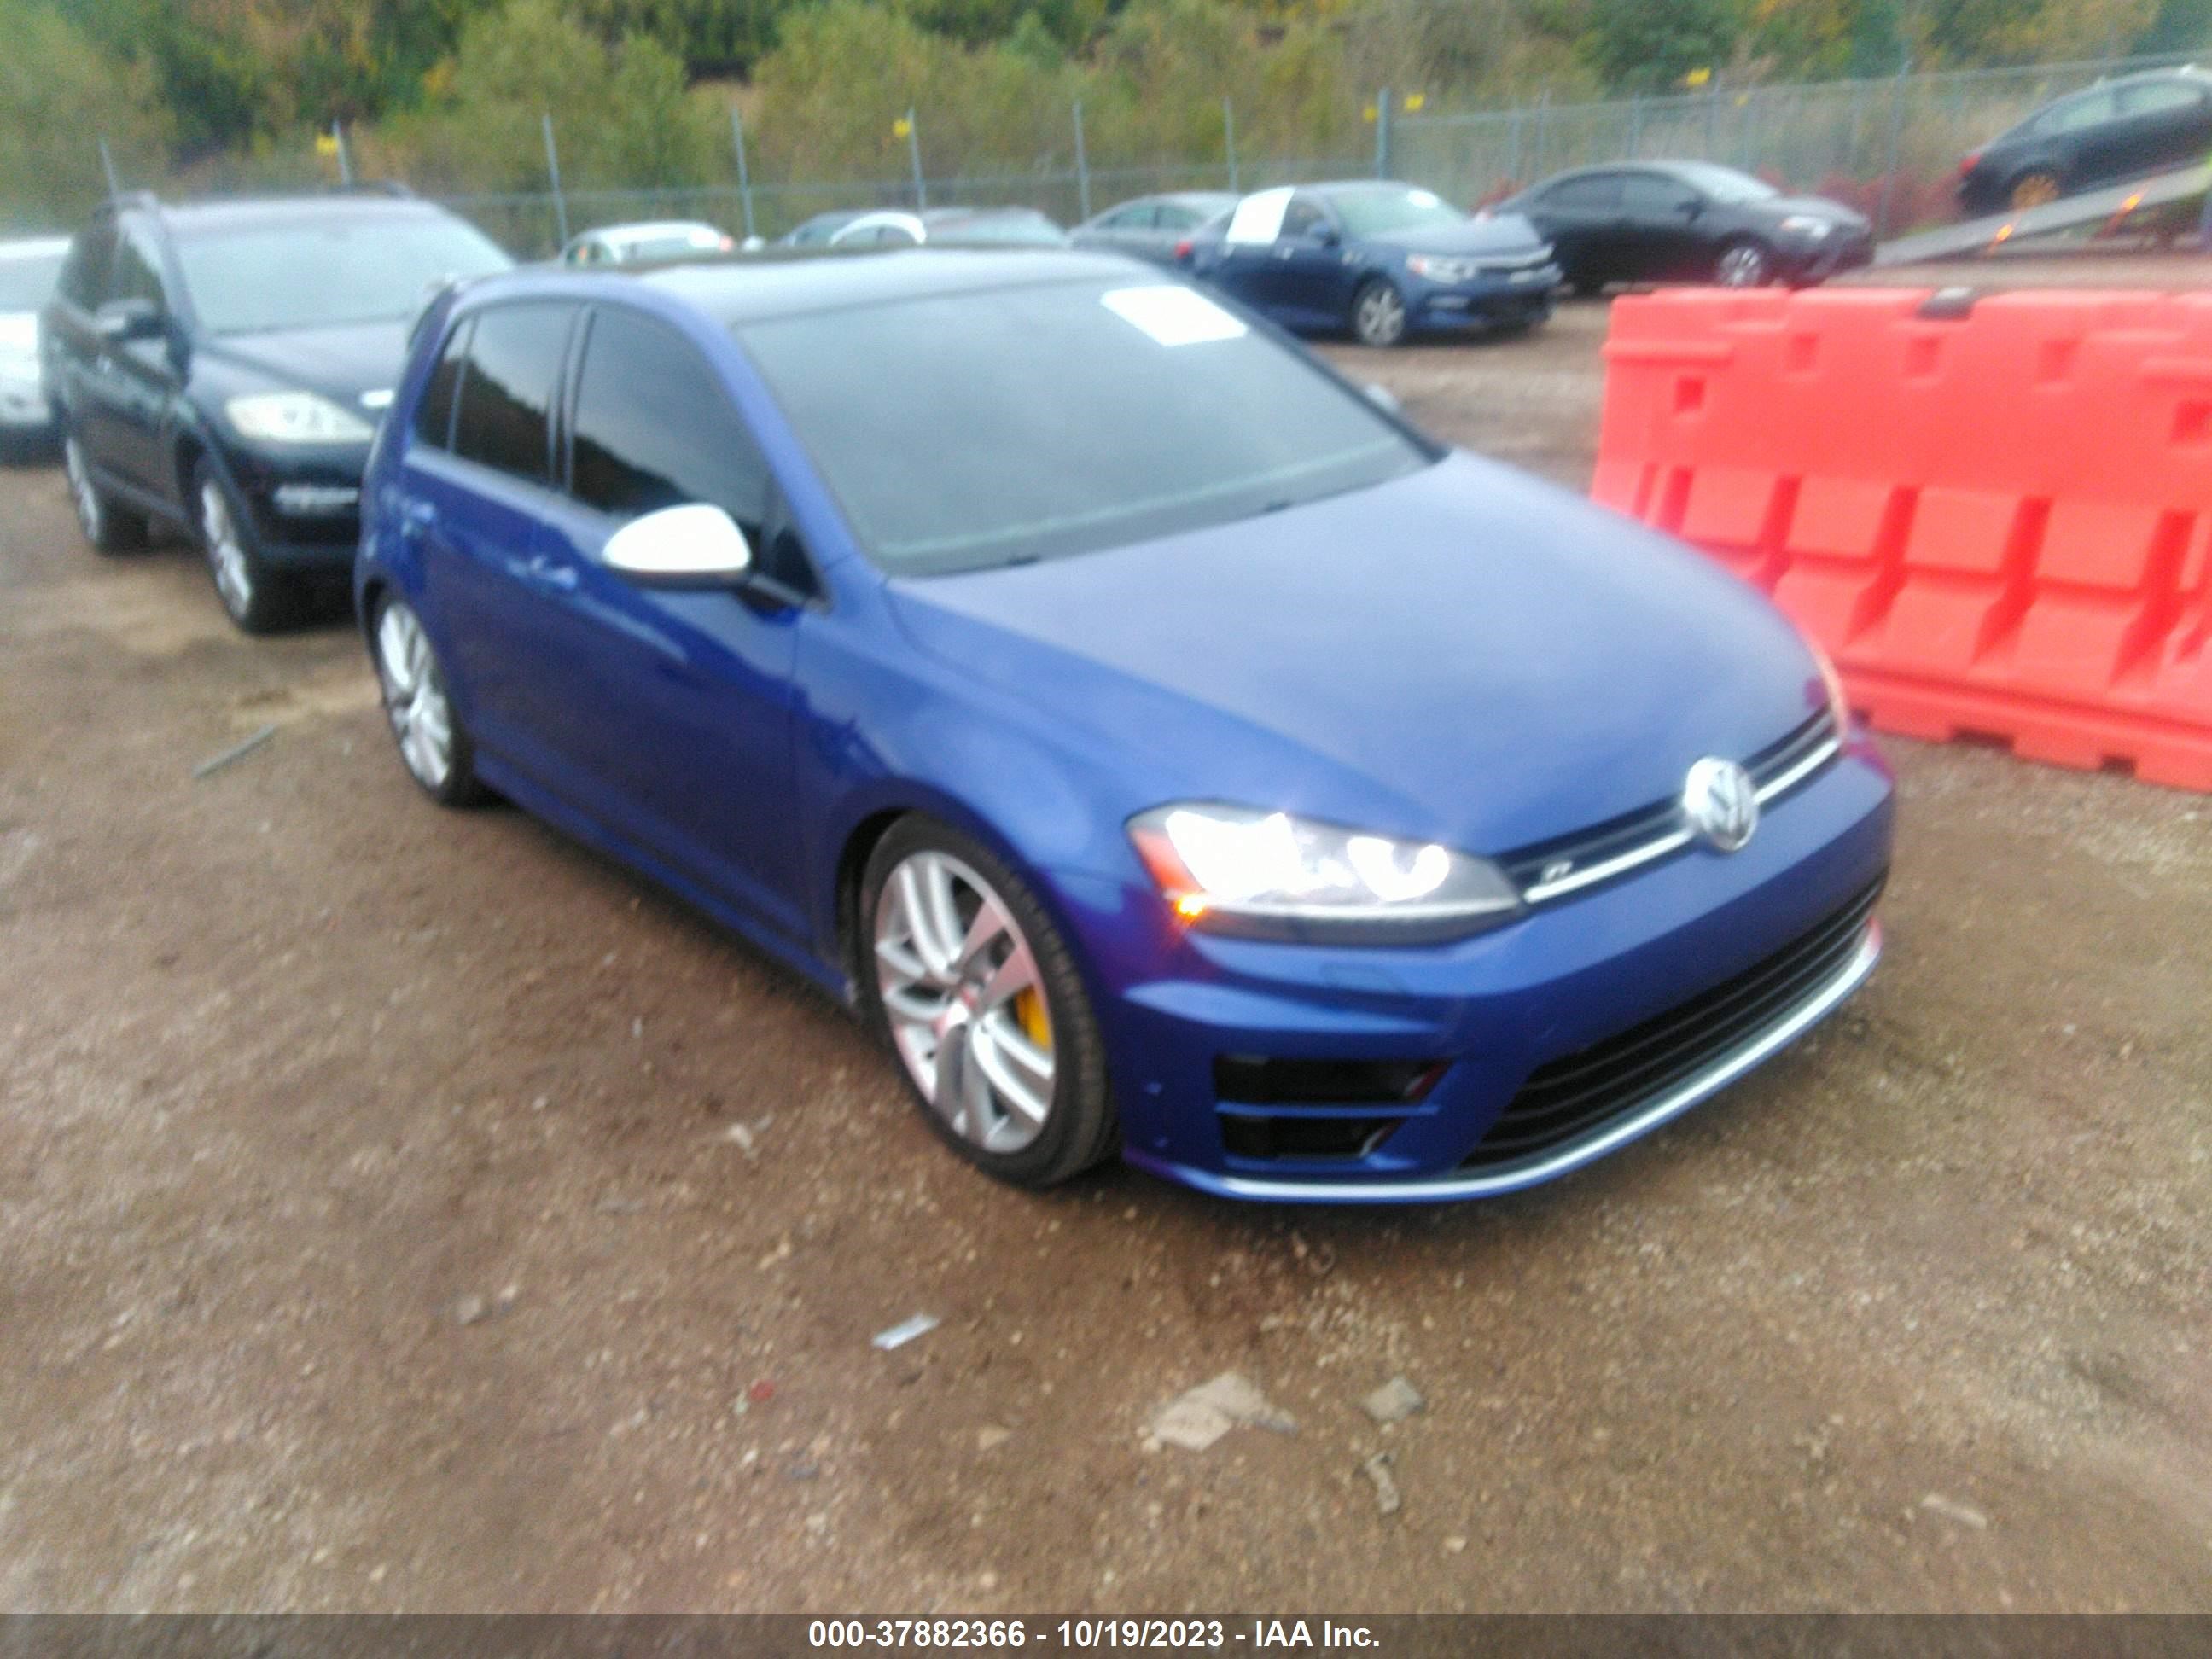 vin: WVWLF7AU0GW236080 WVWLF7AU0GW236080 2016 volkswagen golf r 2000 for Sale in 60118, 605 Healy Road, East Dundee, Wisconsin, USA